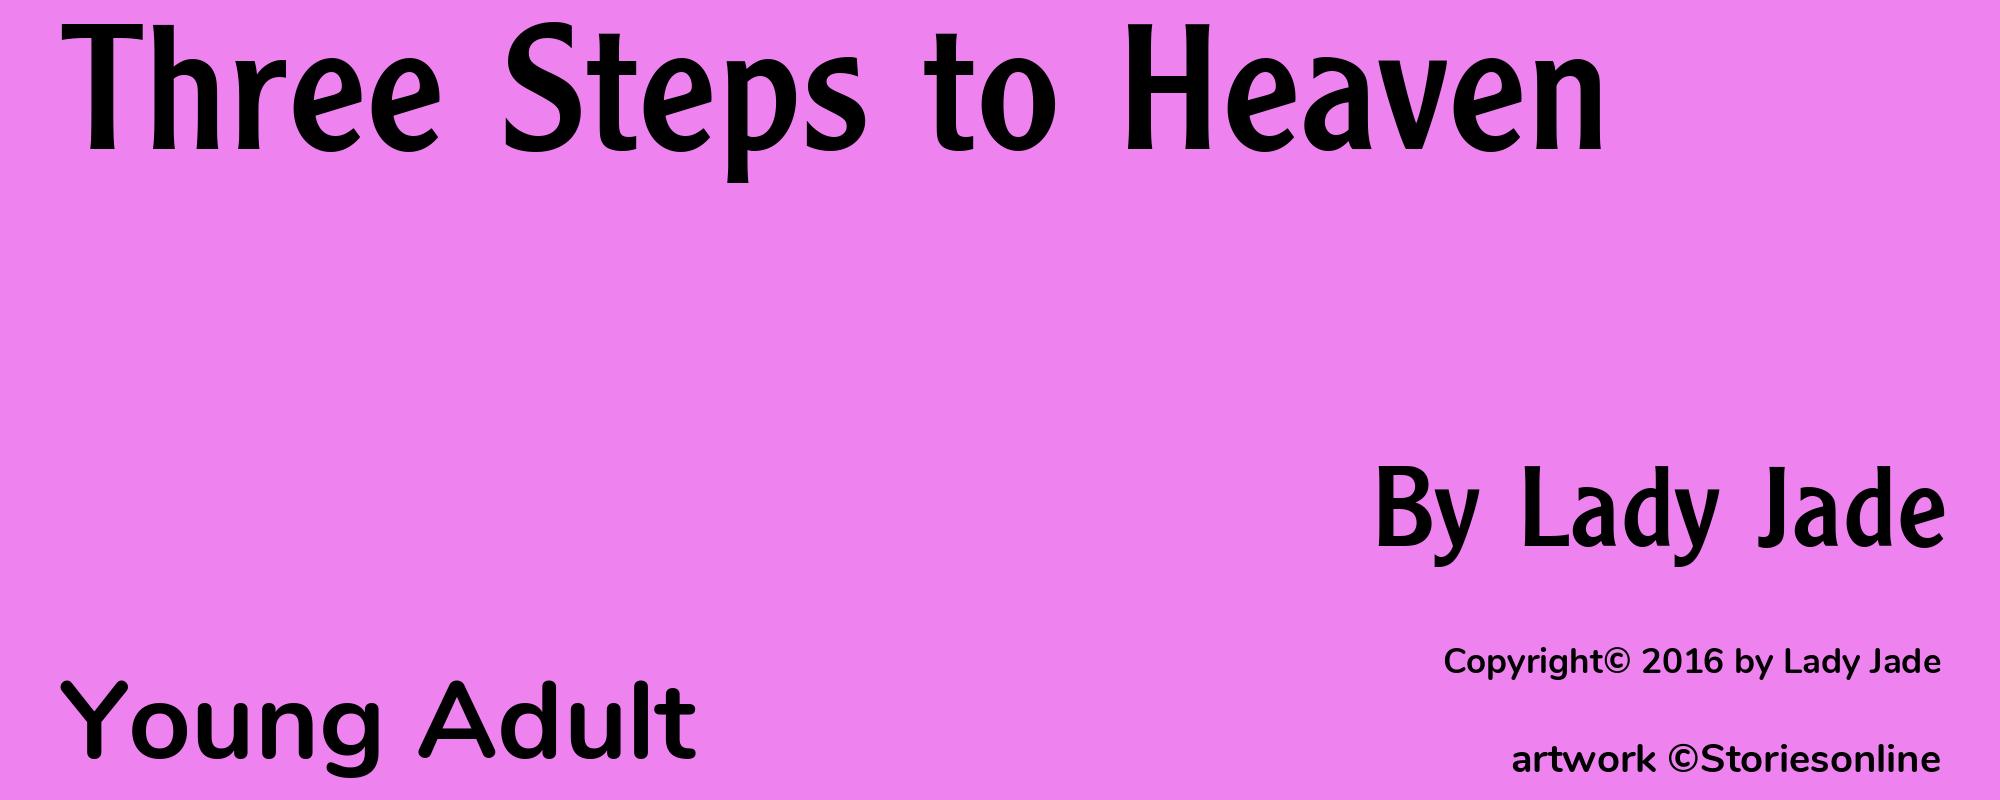 Three Steps to Heaven - Cover